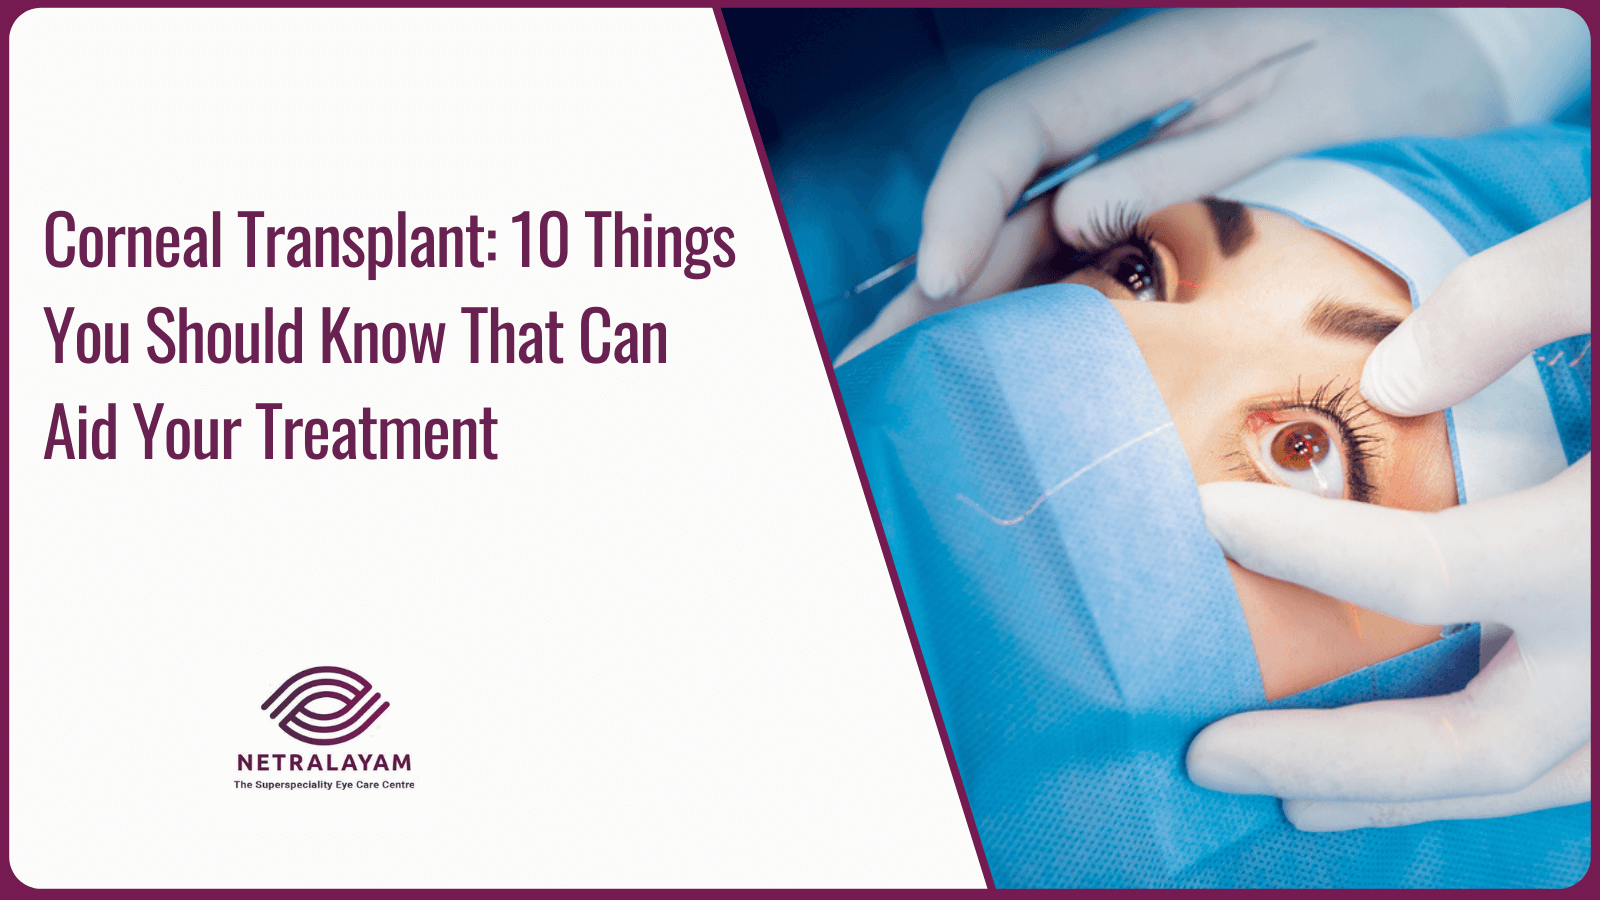 Corneal Transplant: 10 Things You Should Know That Can Aid Your Treatment